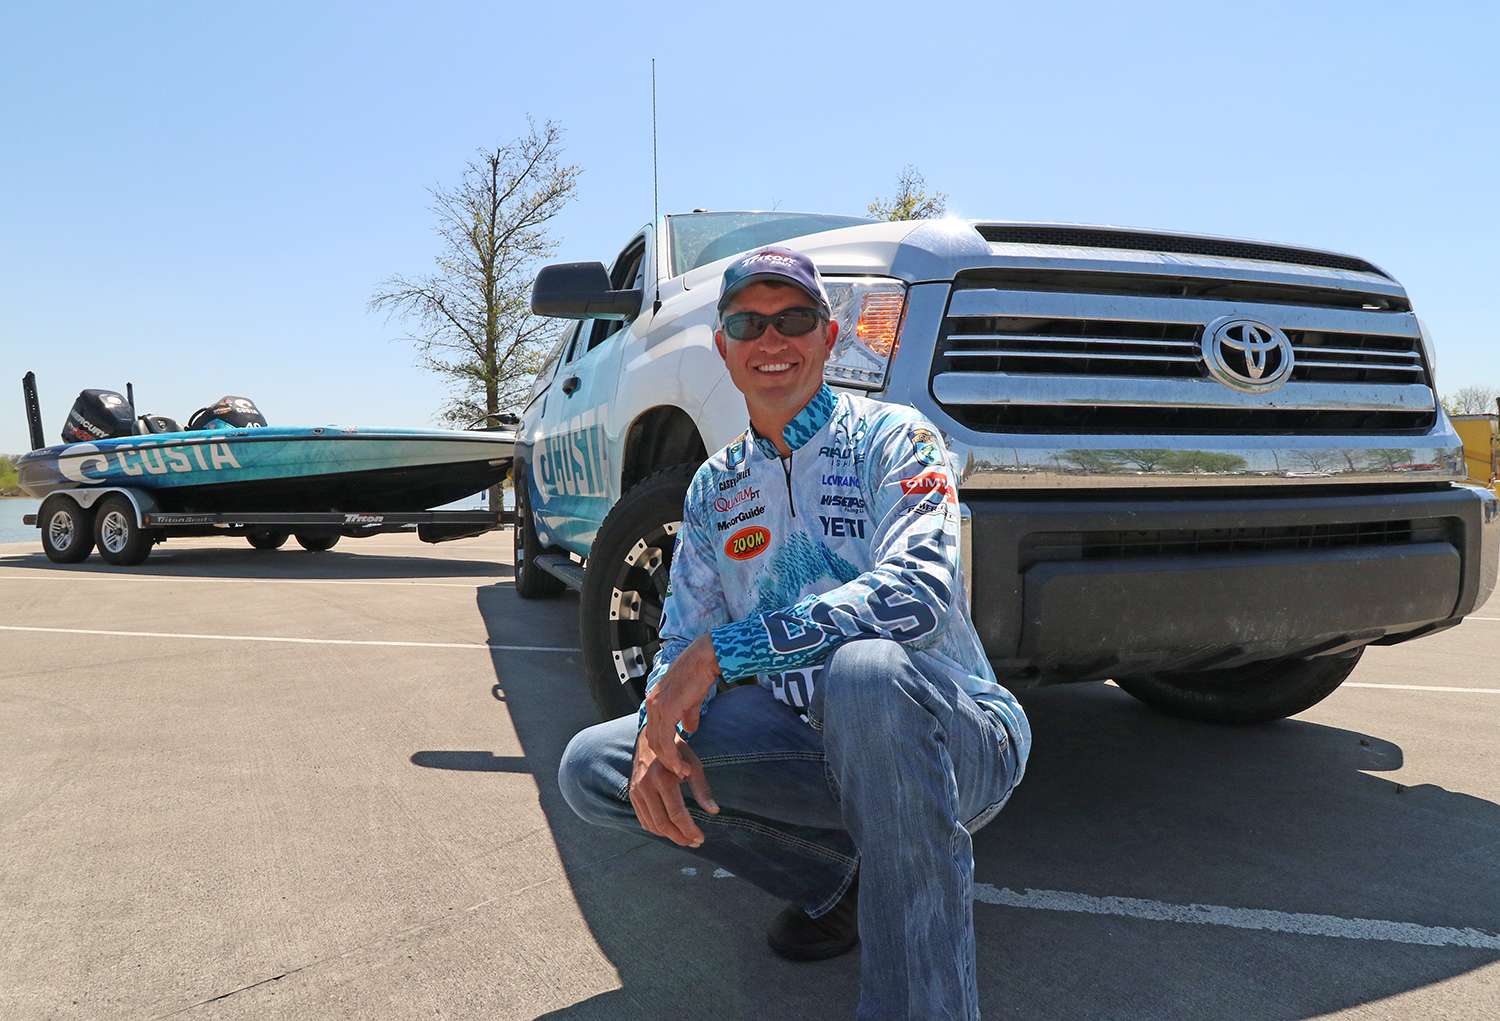 Casey Ashley has driven his 2017 Toyota Tundra Double Cab to 14 tournaments, and he loves its towing capacity. âMy Tundra allows me to pull my boat without even noticing itâs back there. It rides very good. Itâs quiet, and it turns on a dime.â  